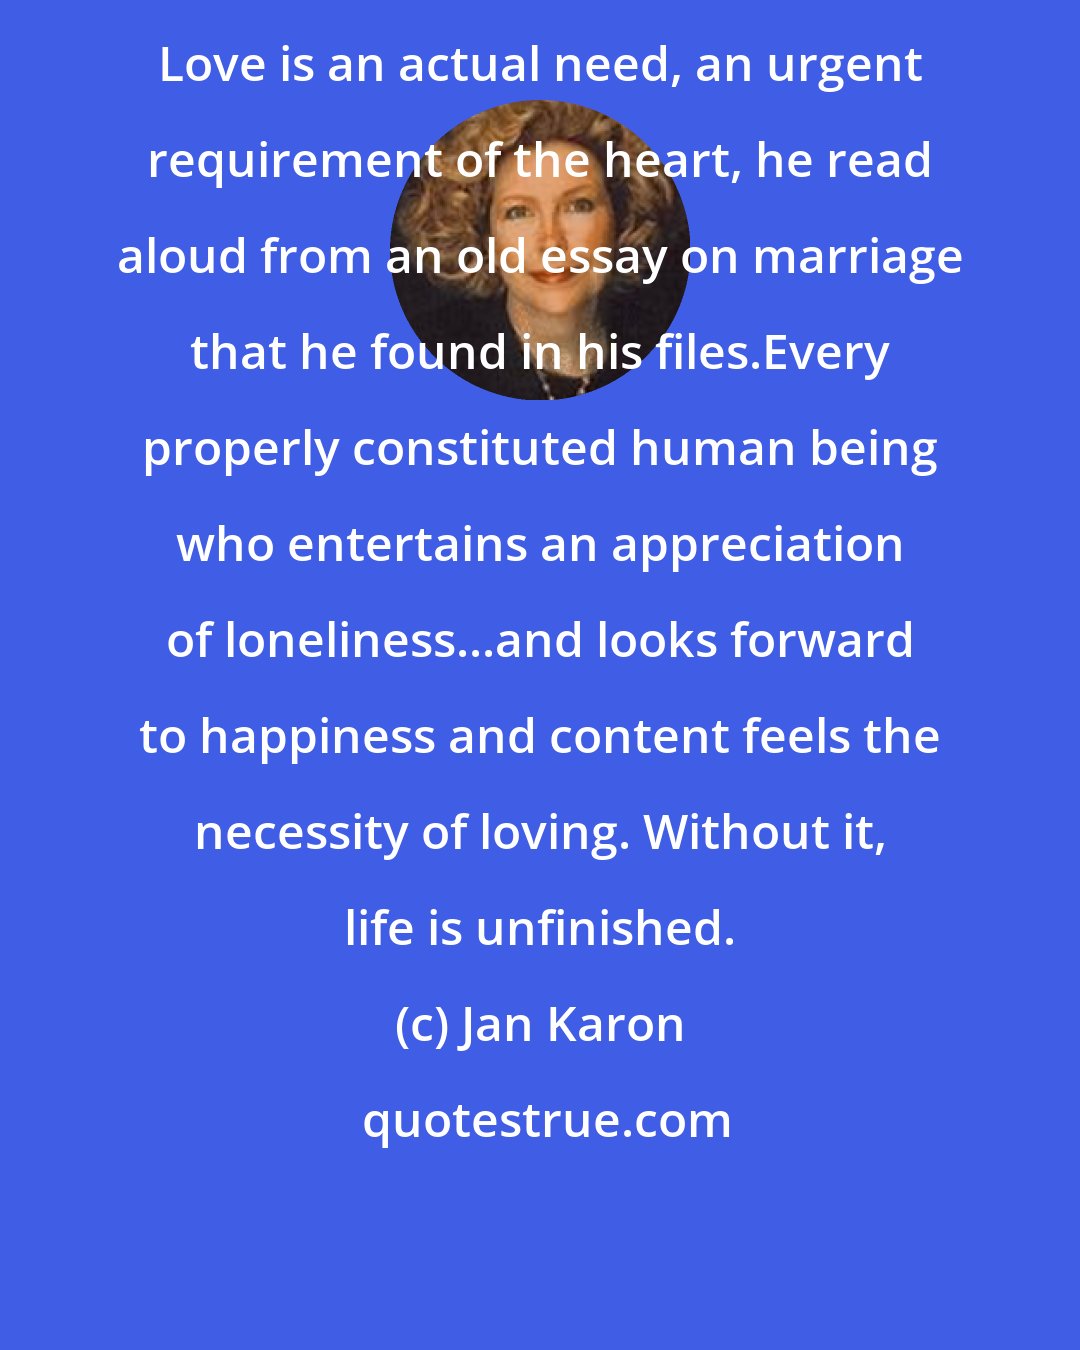 Jan Karon: Love is an actual need, an urgent requirement of the heart, he read aloud from an old essay on marriage that he found in his files.Every properly constituted human being who entertains an appreciation of loneliness...and looks forward to happiness and content feels the necessity of loving. Without it, life is unfinished.